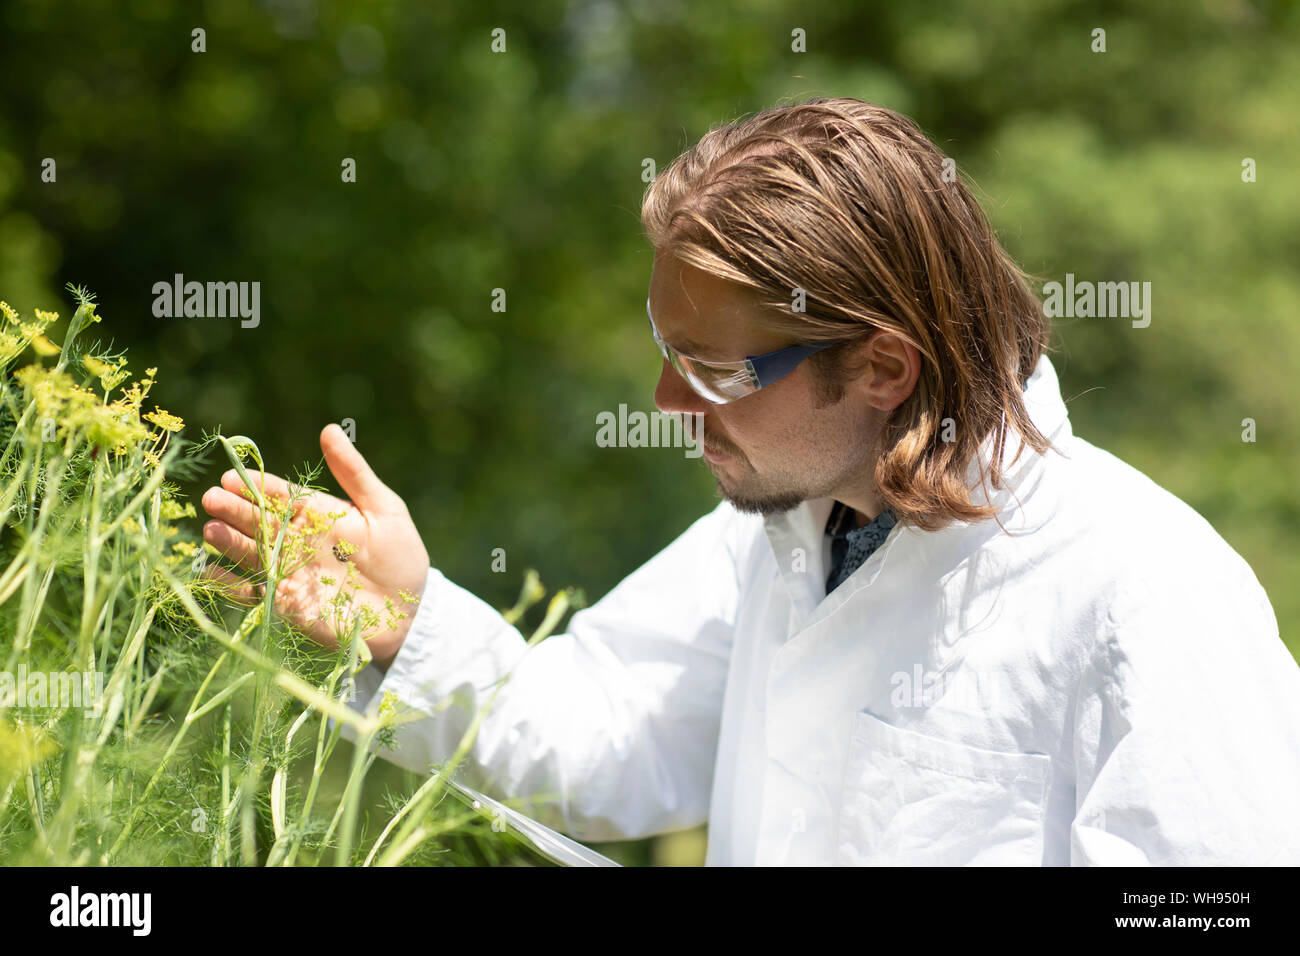 Researcher in a laboratory coat examining bees and plants outside Stock Photo